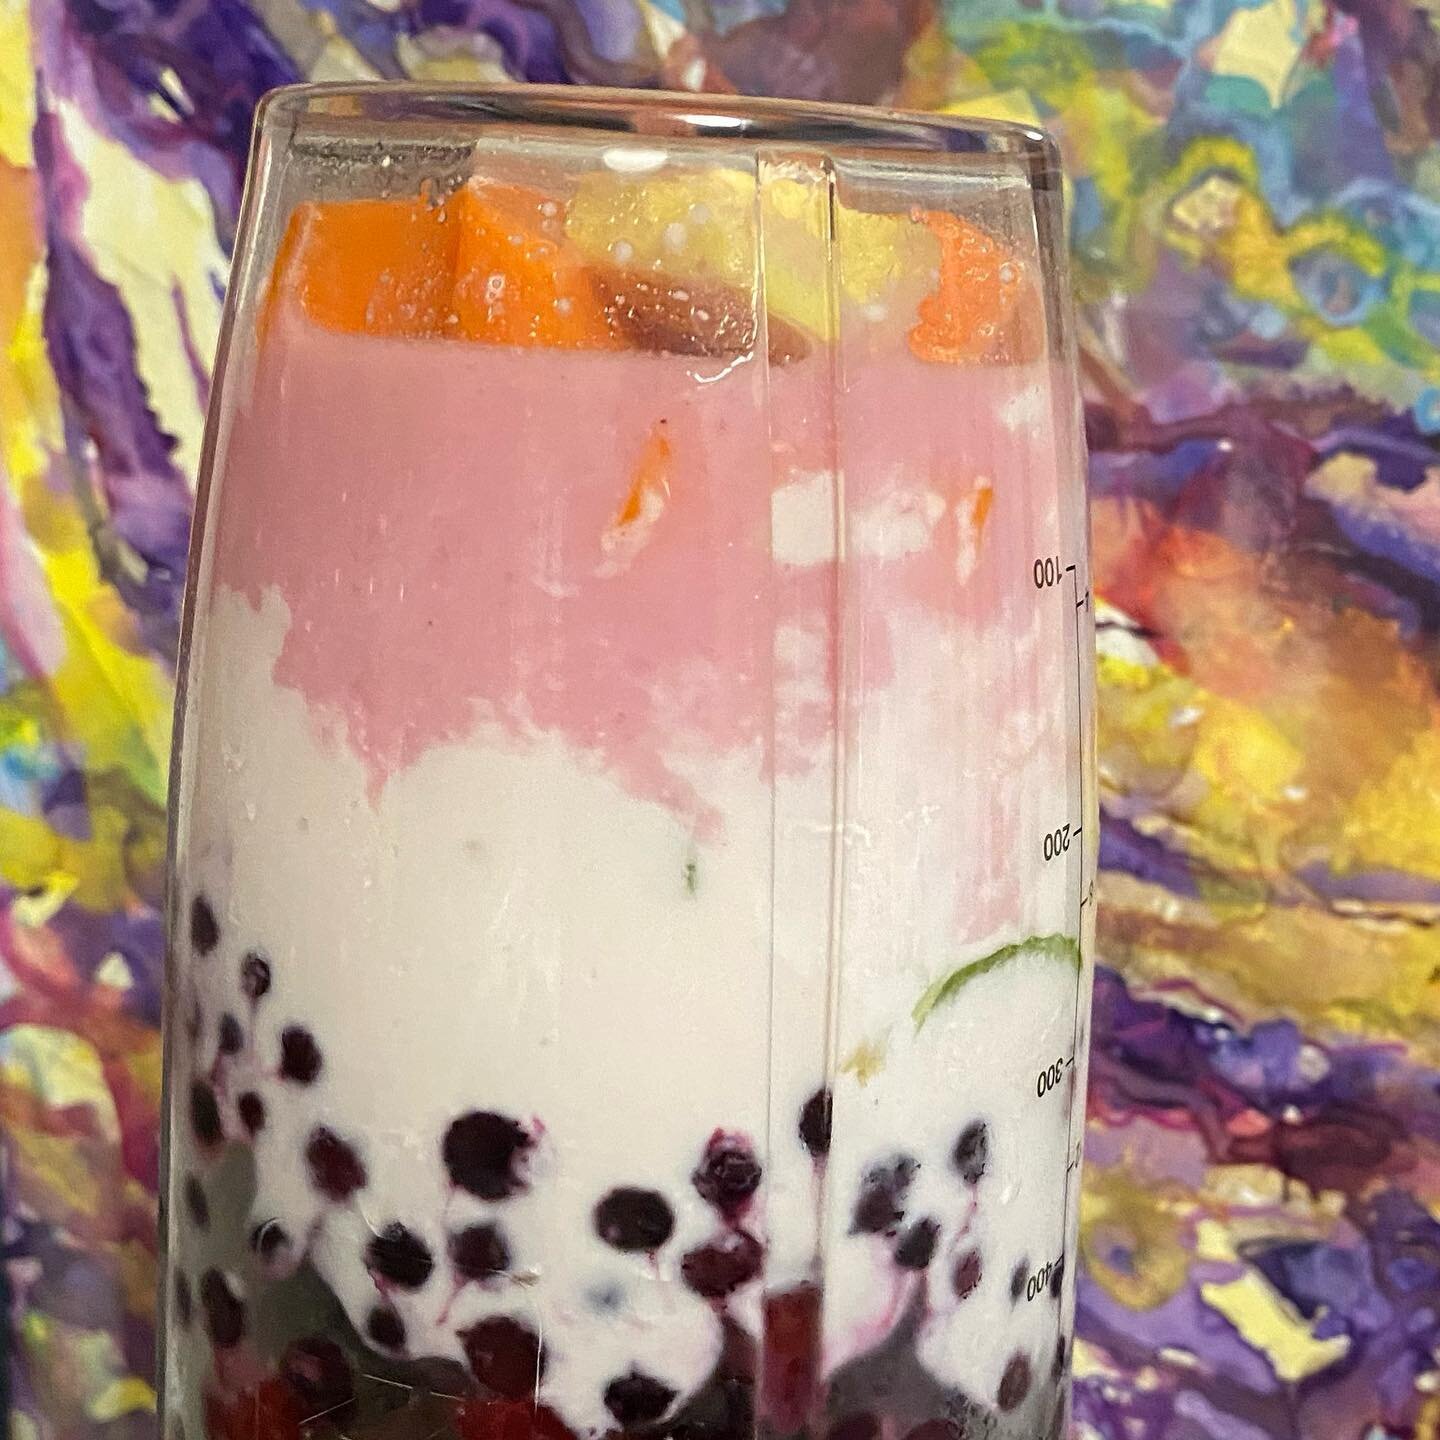 Brightening Smoothie  Combine: carrot, celery, 1 cup frozen berries, handful of baby greens, 1/2 beet, 1/2 lemon&rsquo;s juice, 1 inch of fresh ginger, 1/2 cup cashew or dairy kefir.  Artwork by #Jaime Courcelle